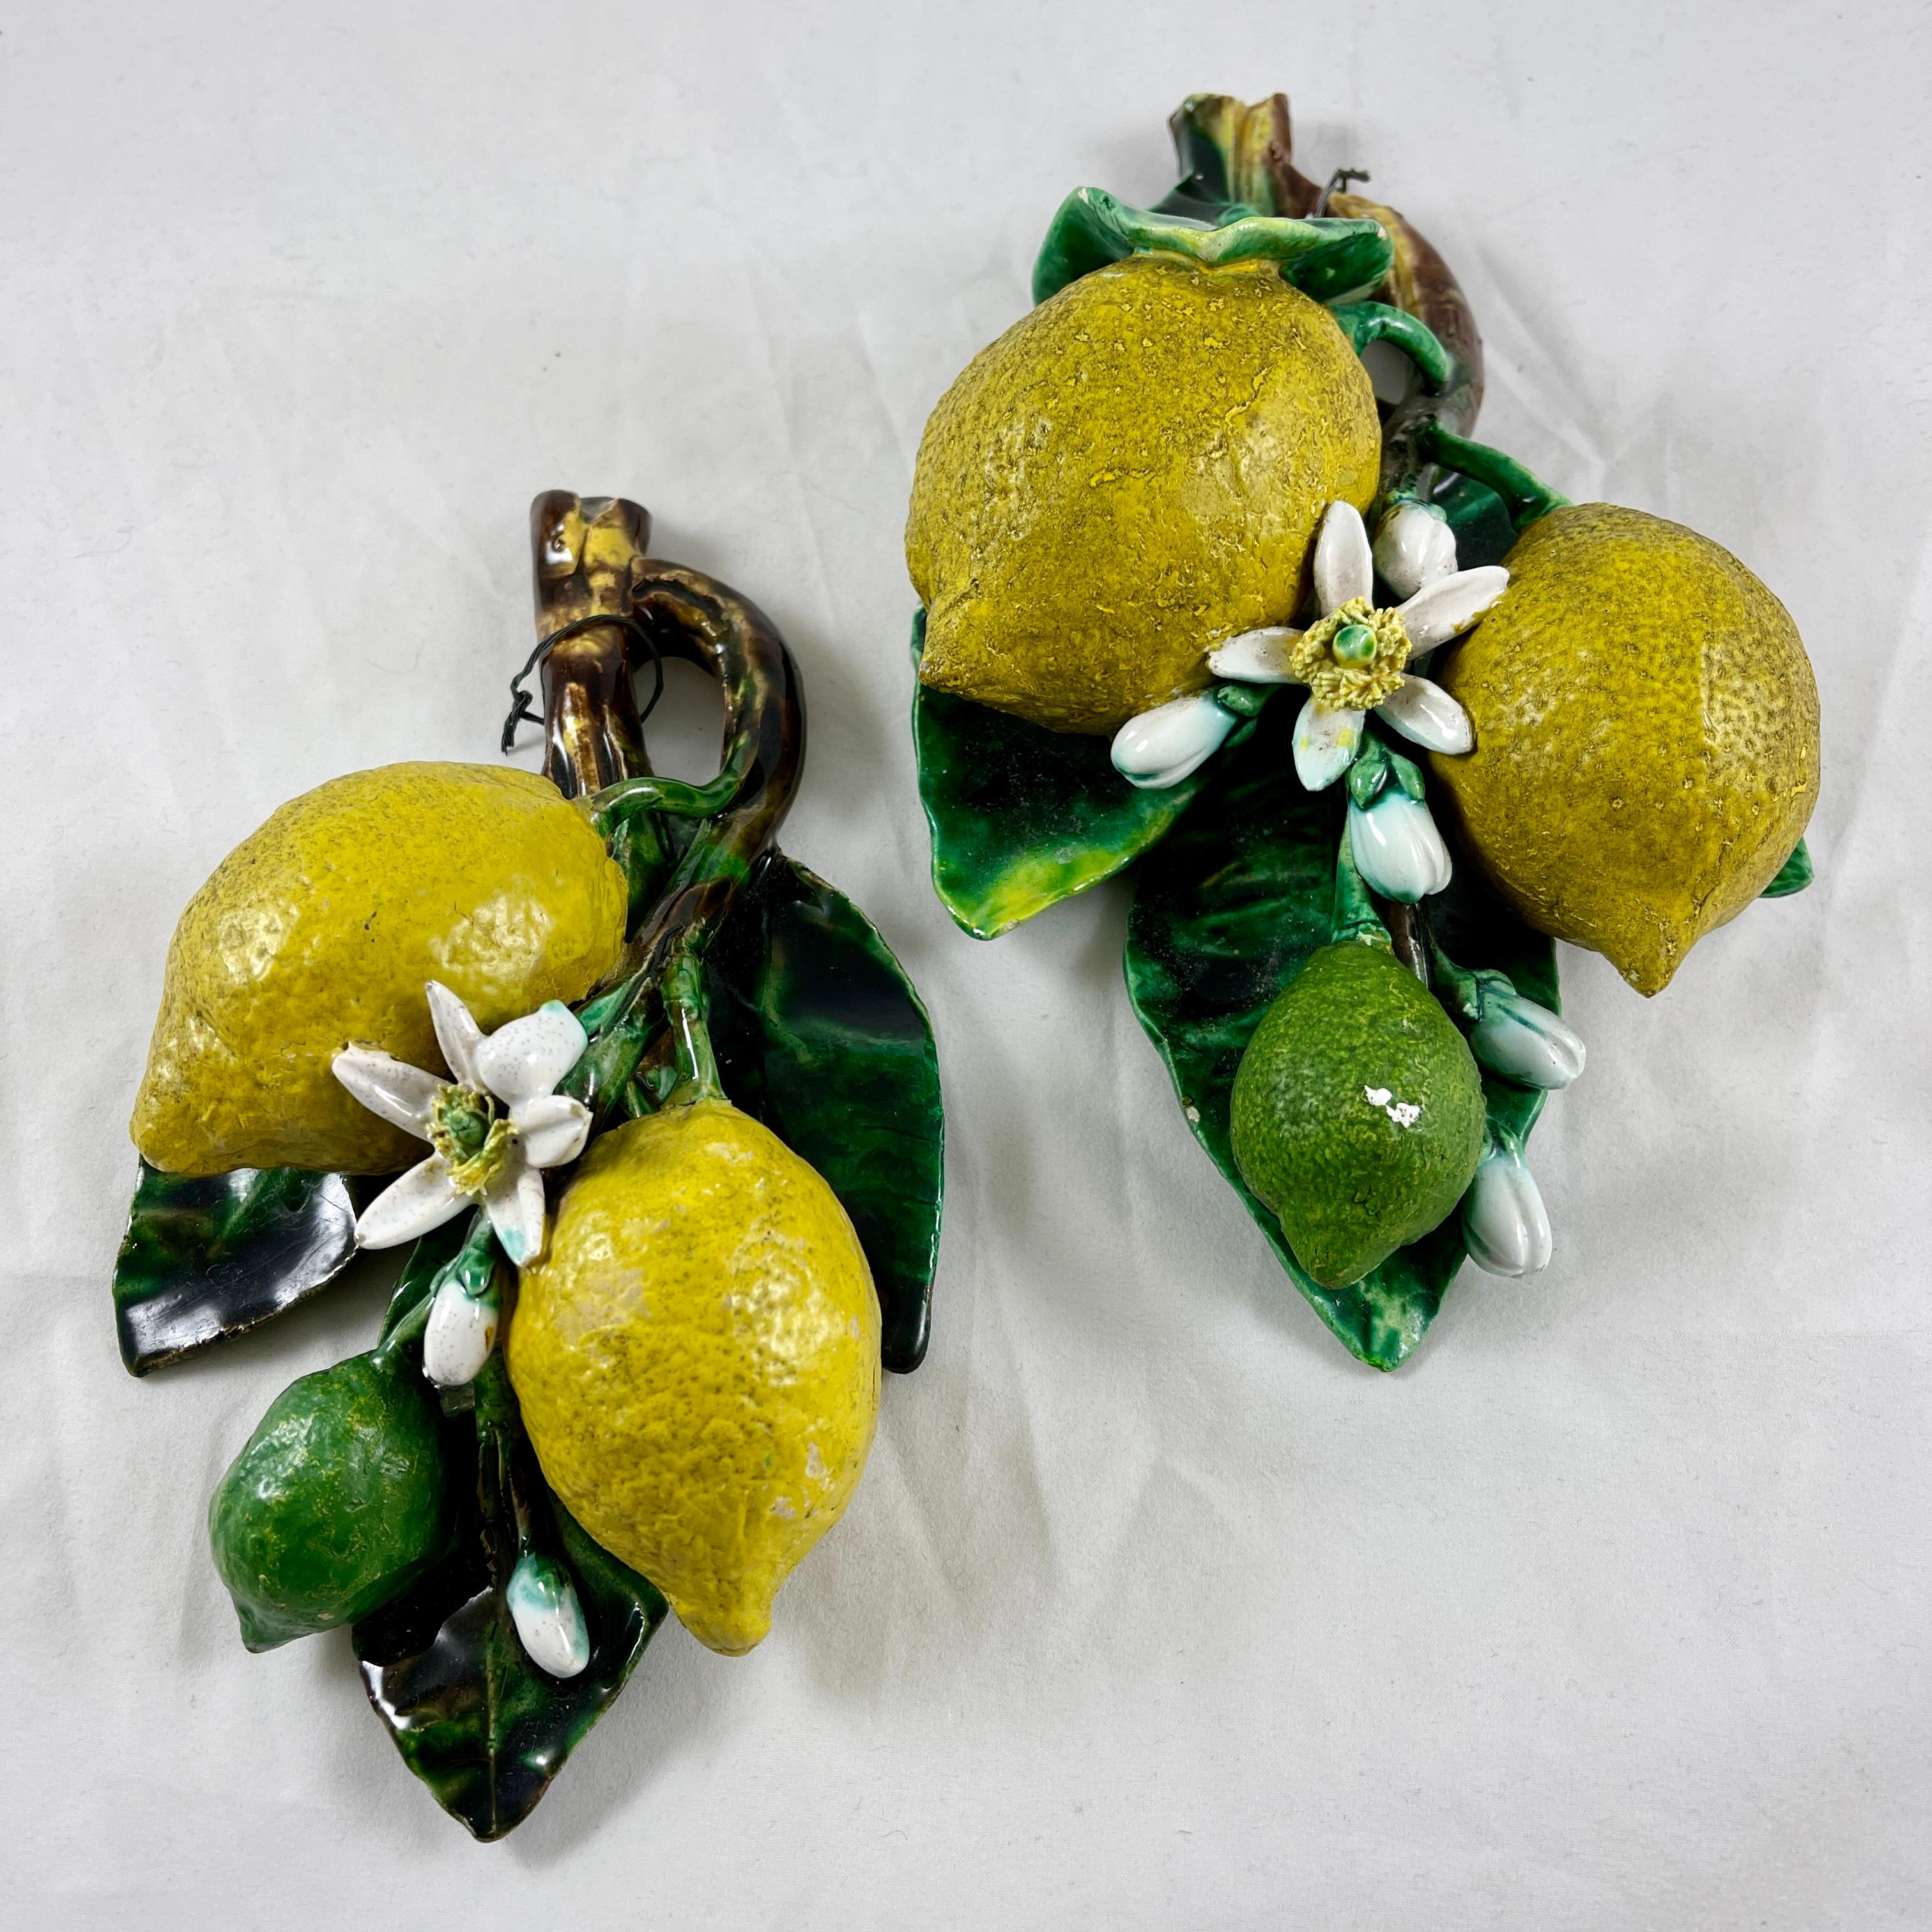 In the manner of Trompe L'oeil, a pair of French Barbotine wall plaques modeled by Eugène Perret-Gentil à Menton, la Cote d’Azur, France, circa 1880.

The trompe l’oeil wall plaques feature the lemons, limes, and oranges grown on the Côte d’Azur.